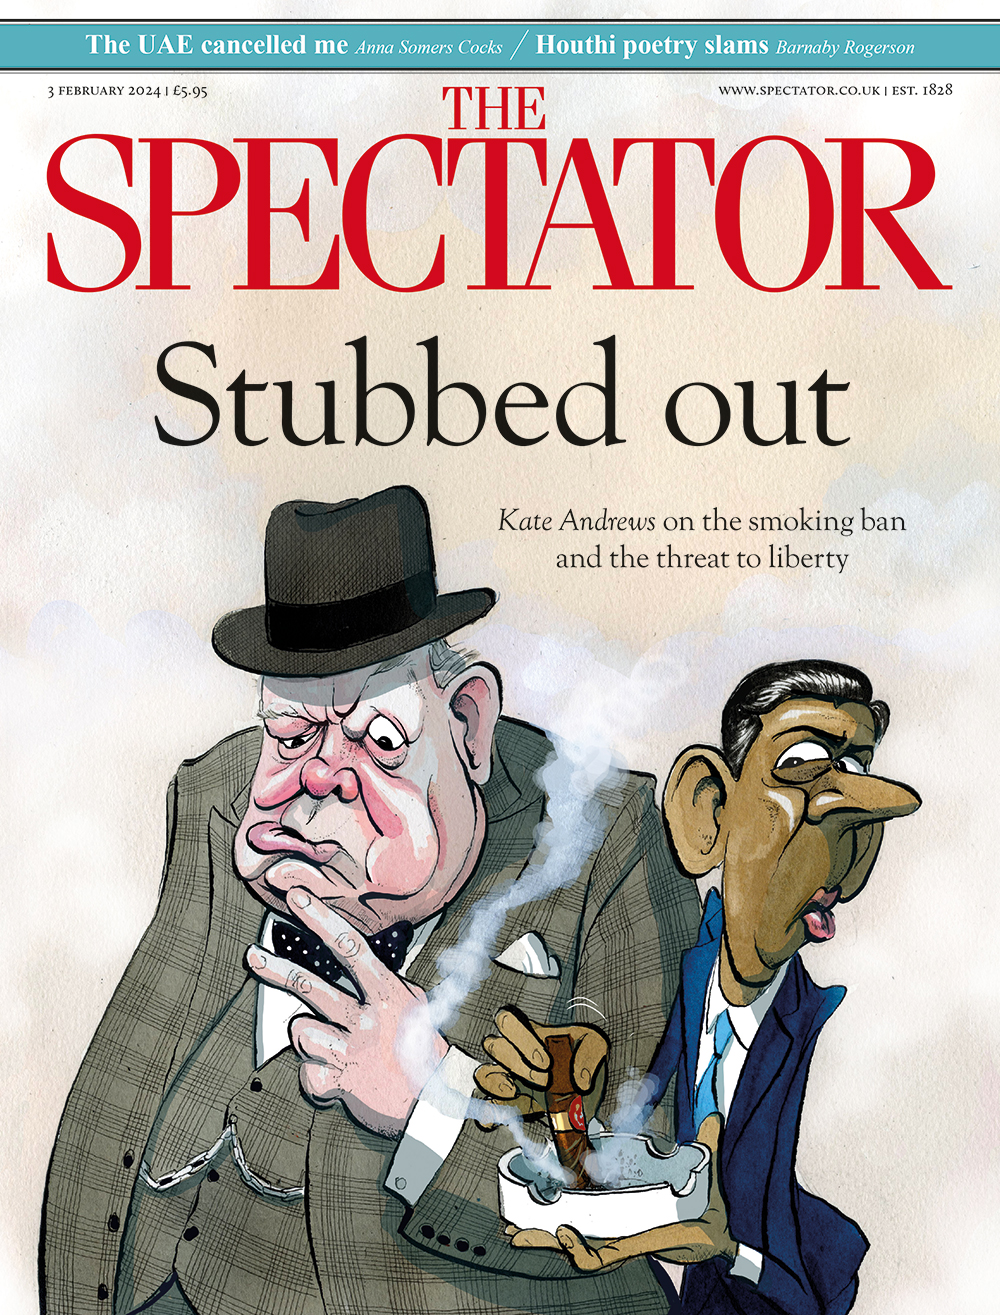 The Australian Edition Of The Spectator Deleted A Letter That Said